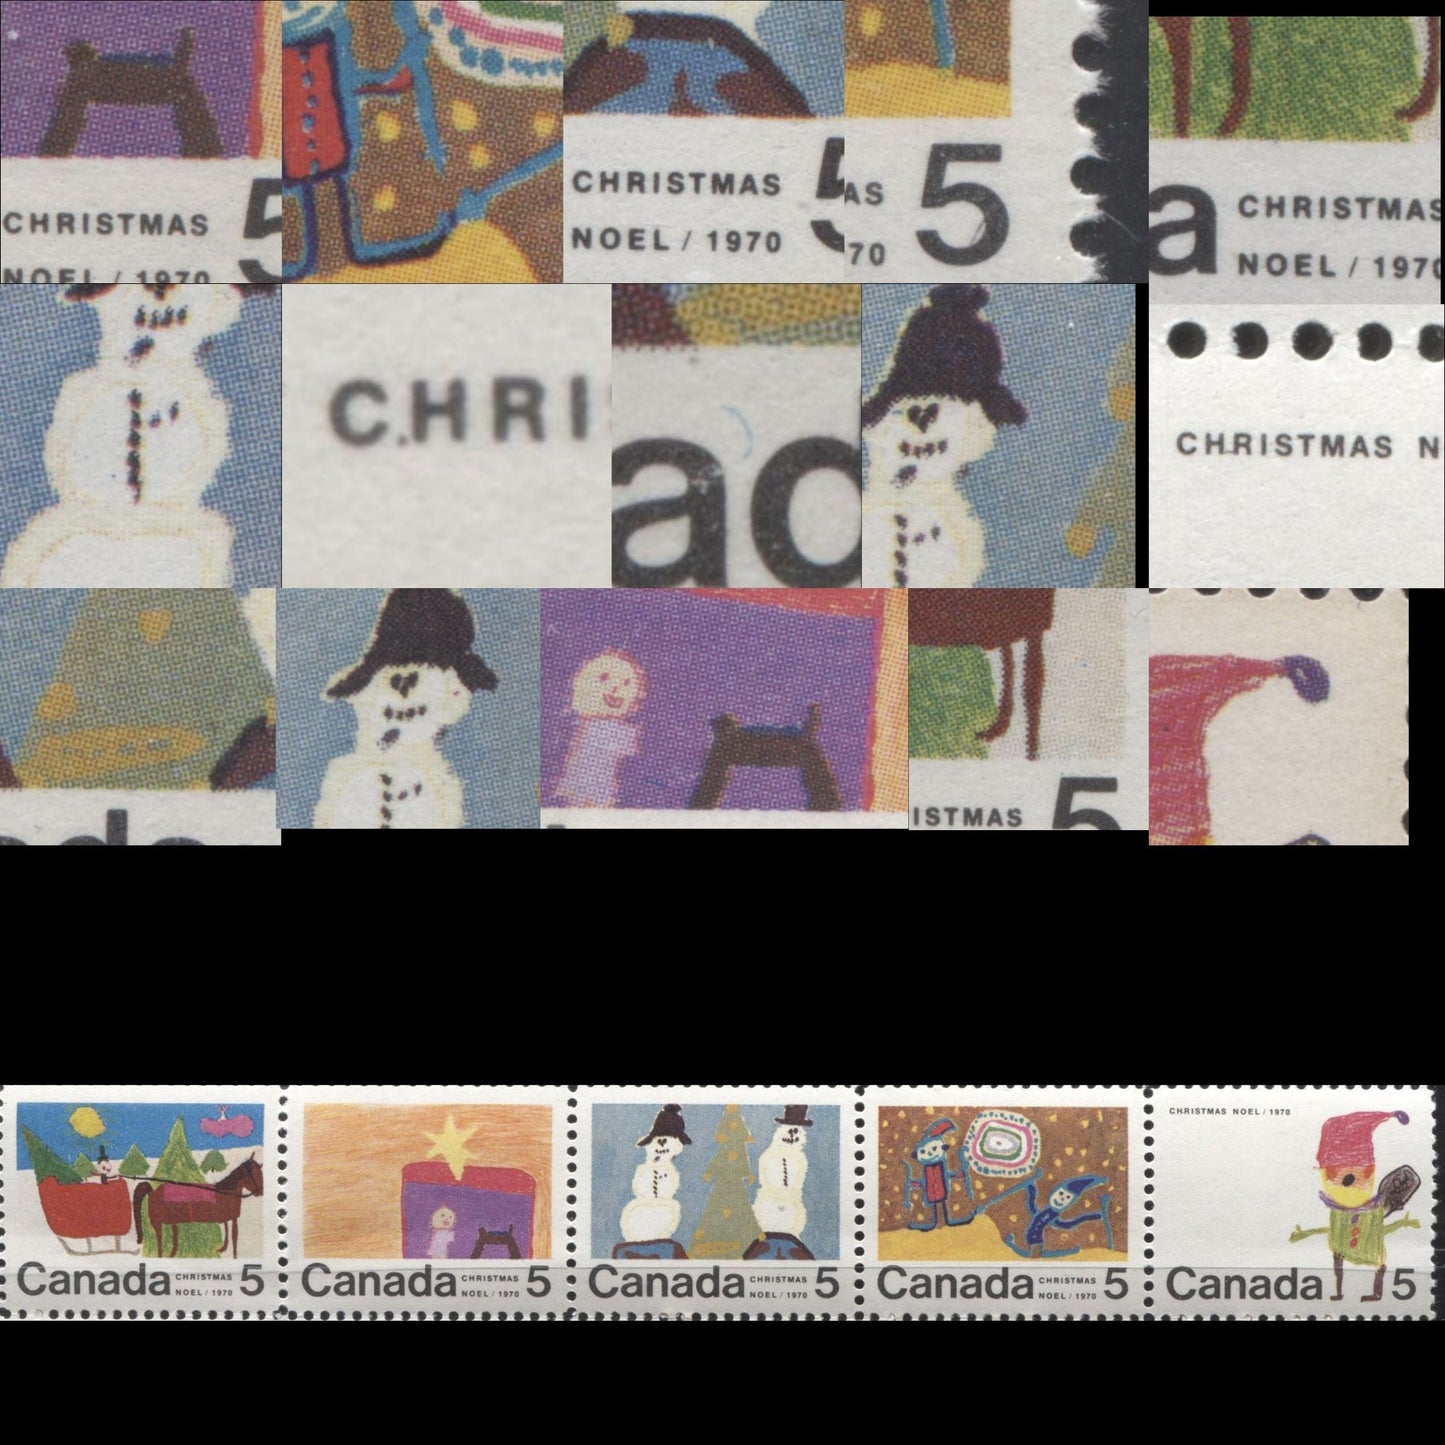 Lot 139 Canada #519-523 5c Multicoloured 1970 Christmas Issue, A Complete Set of 15 Constant Plate Varieties From Combination 3, Ribbed HB11 Paper, Perf. 11.9